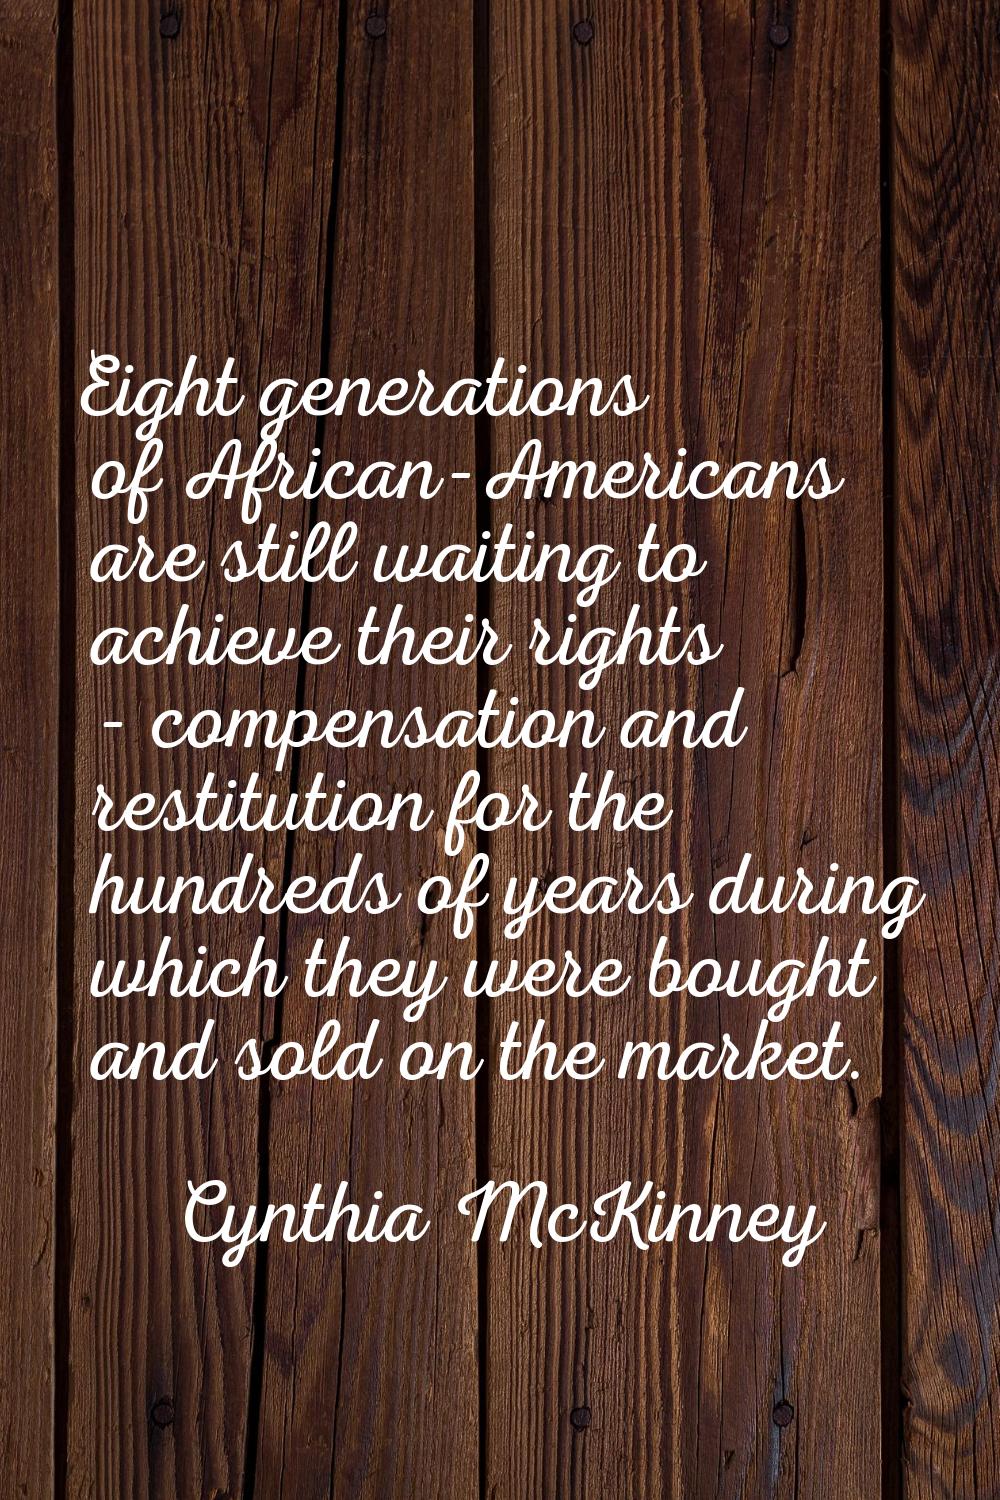 Eight generations of African-Americans are still waiting to achieve their rights - compensation and